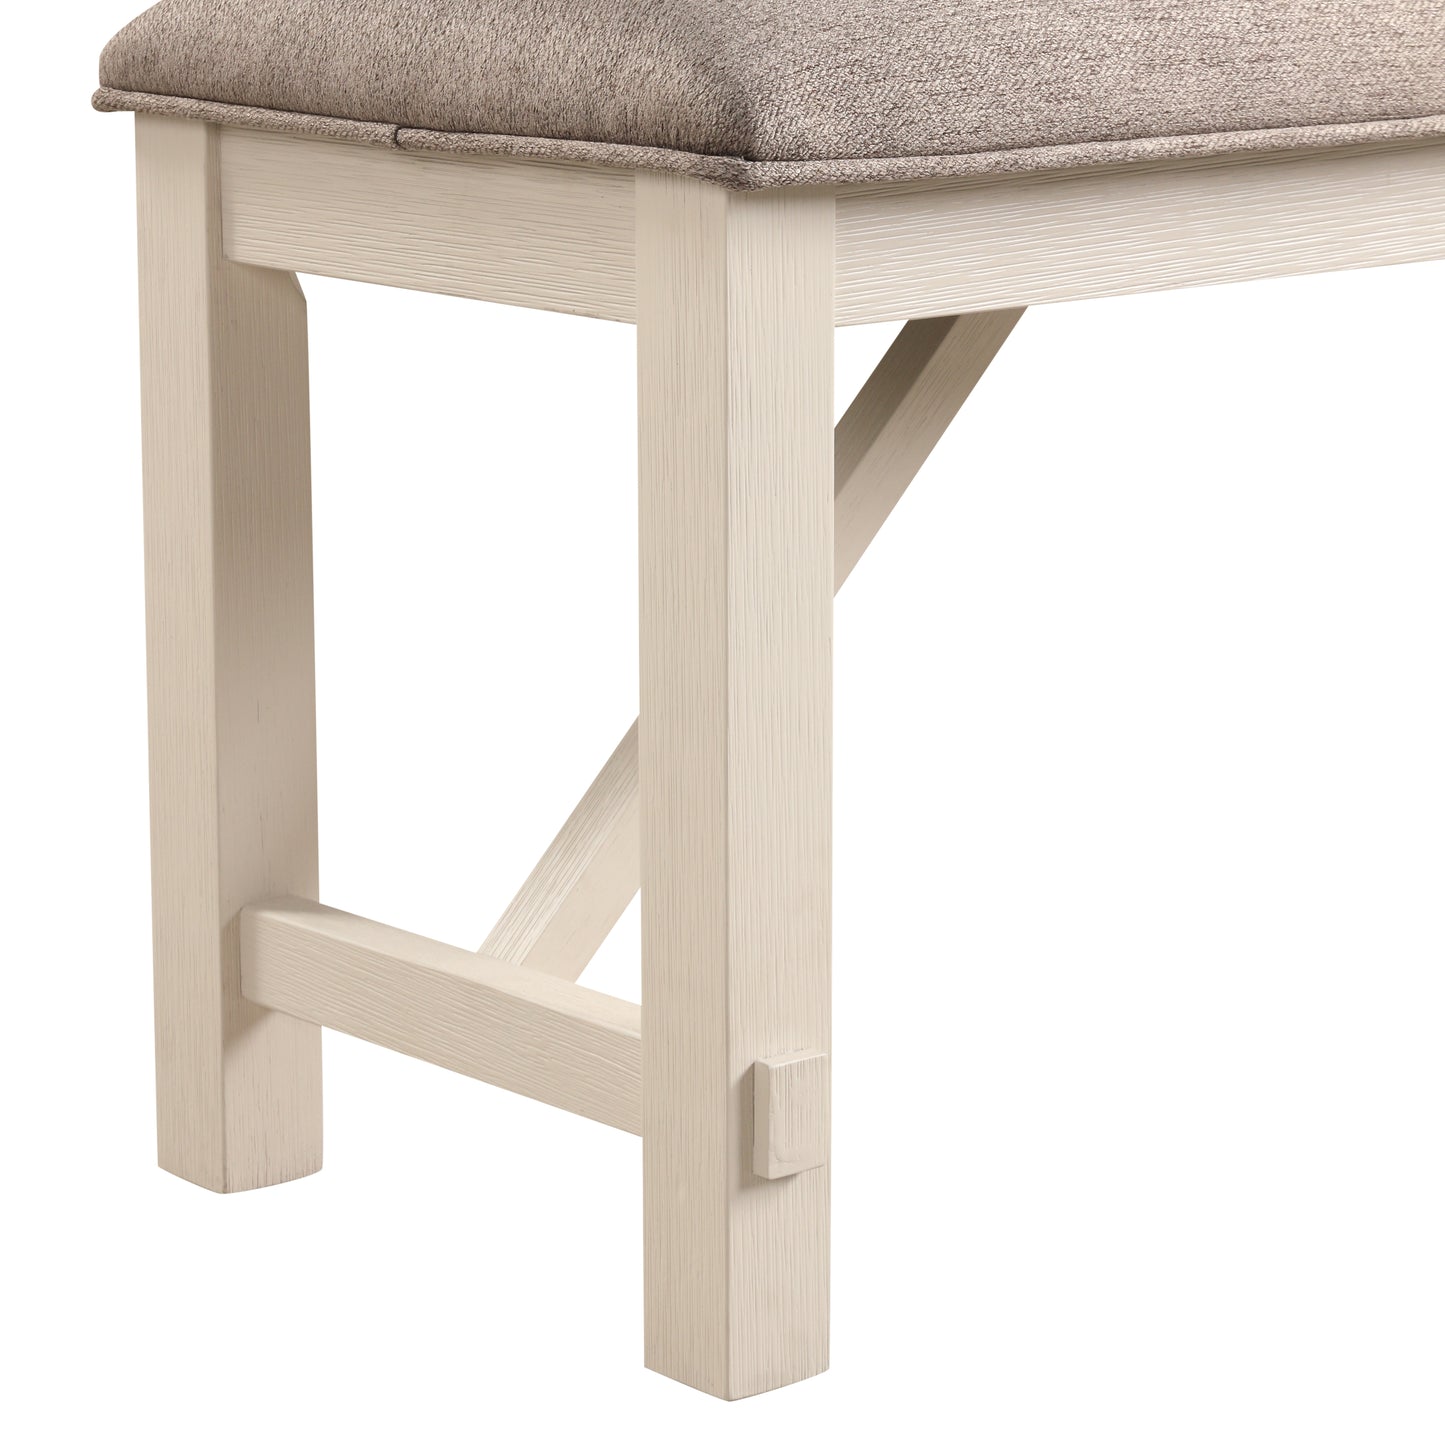 Roundhill Furniture Fasena Off White Solid Wood Upholstered Bench